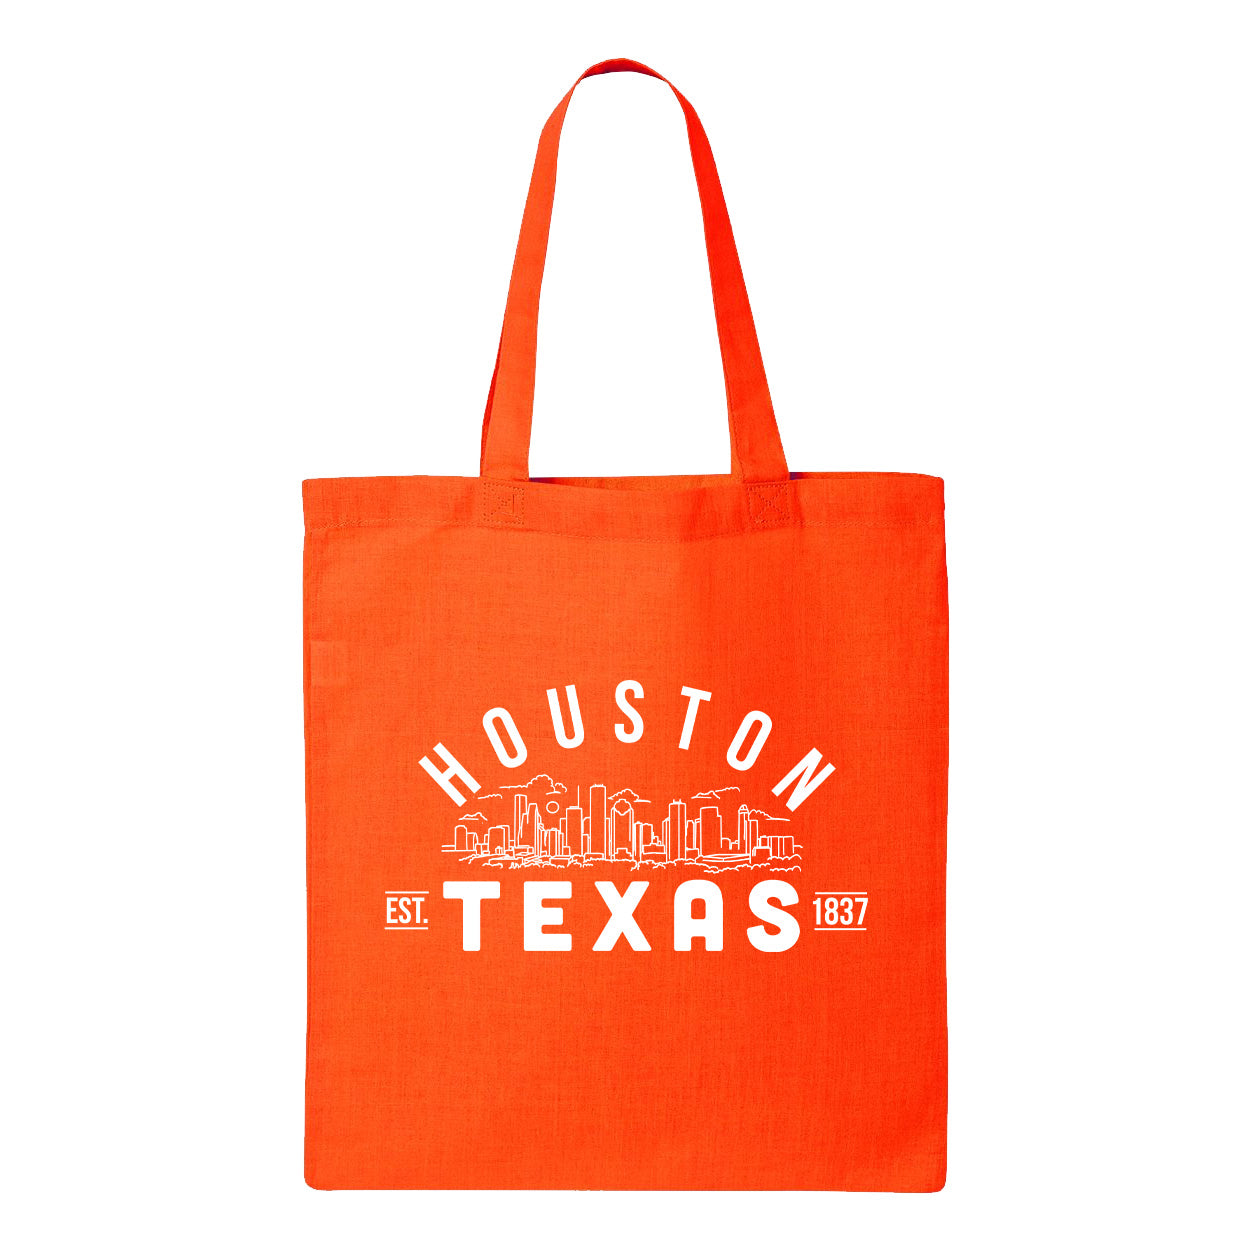 Houston, i am the problem Tote Bag by BITN